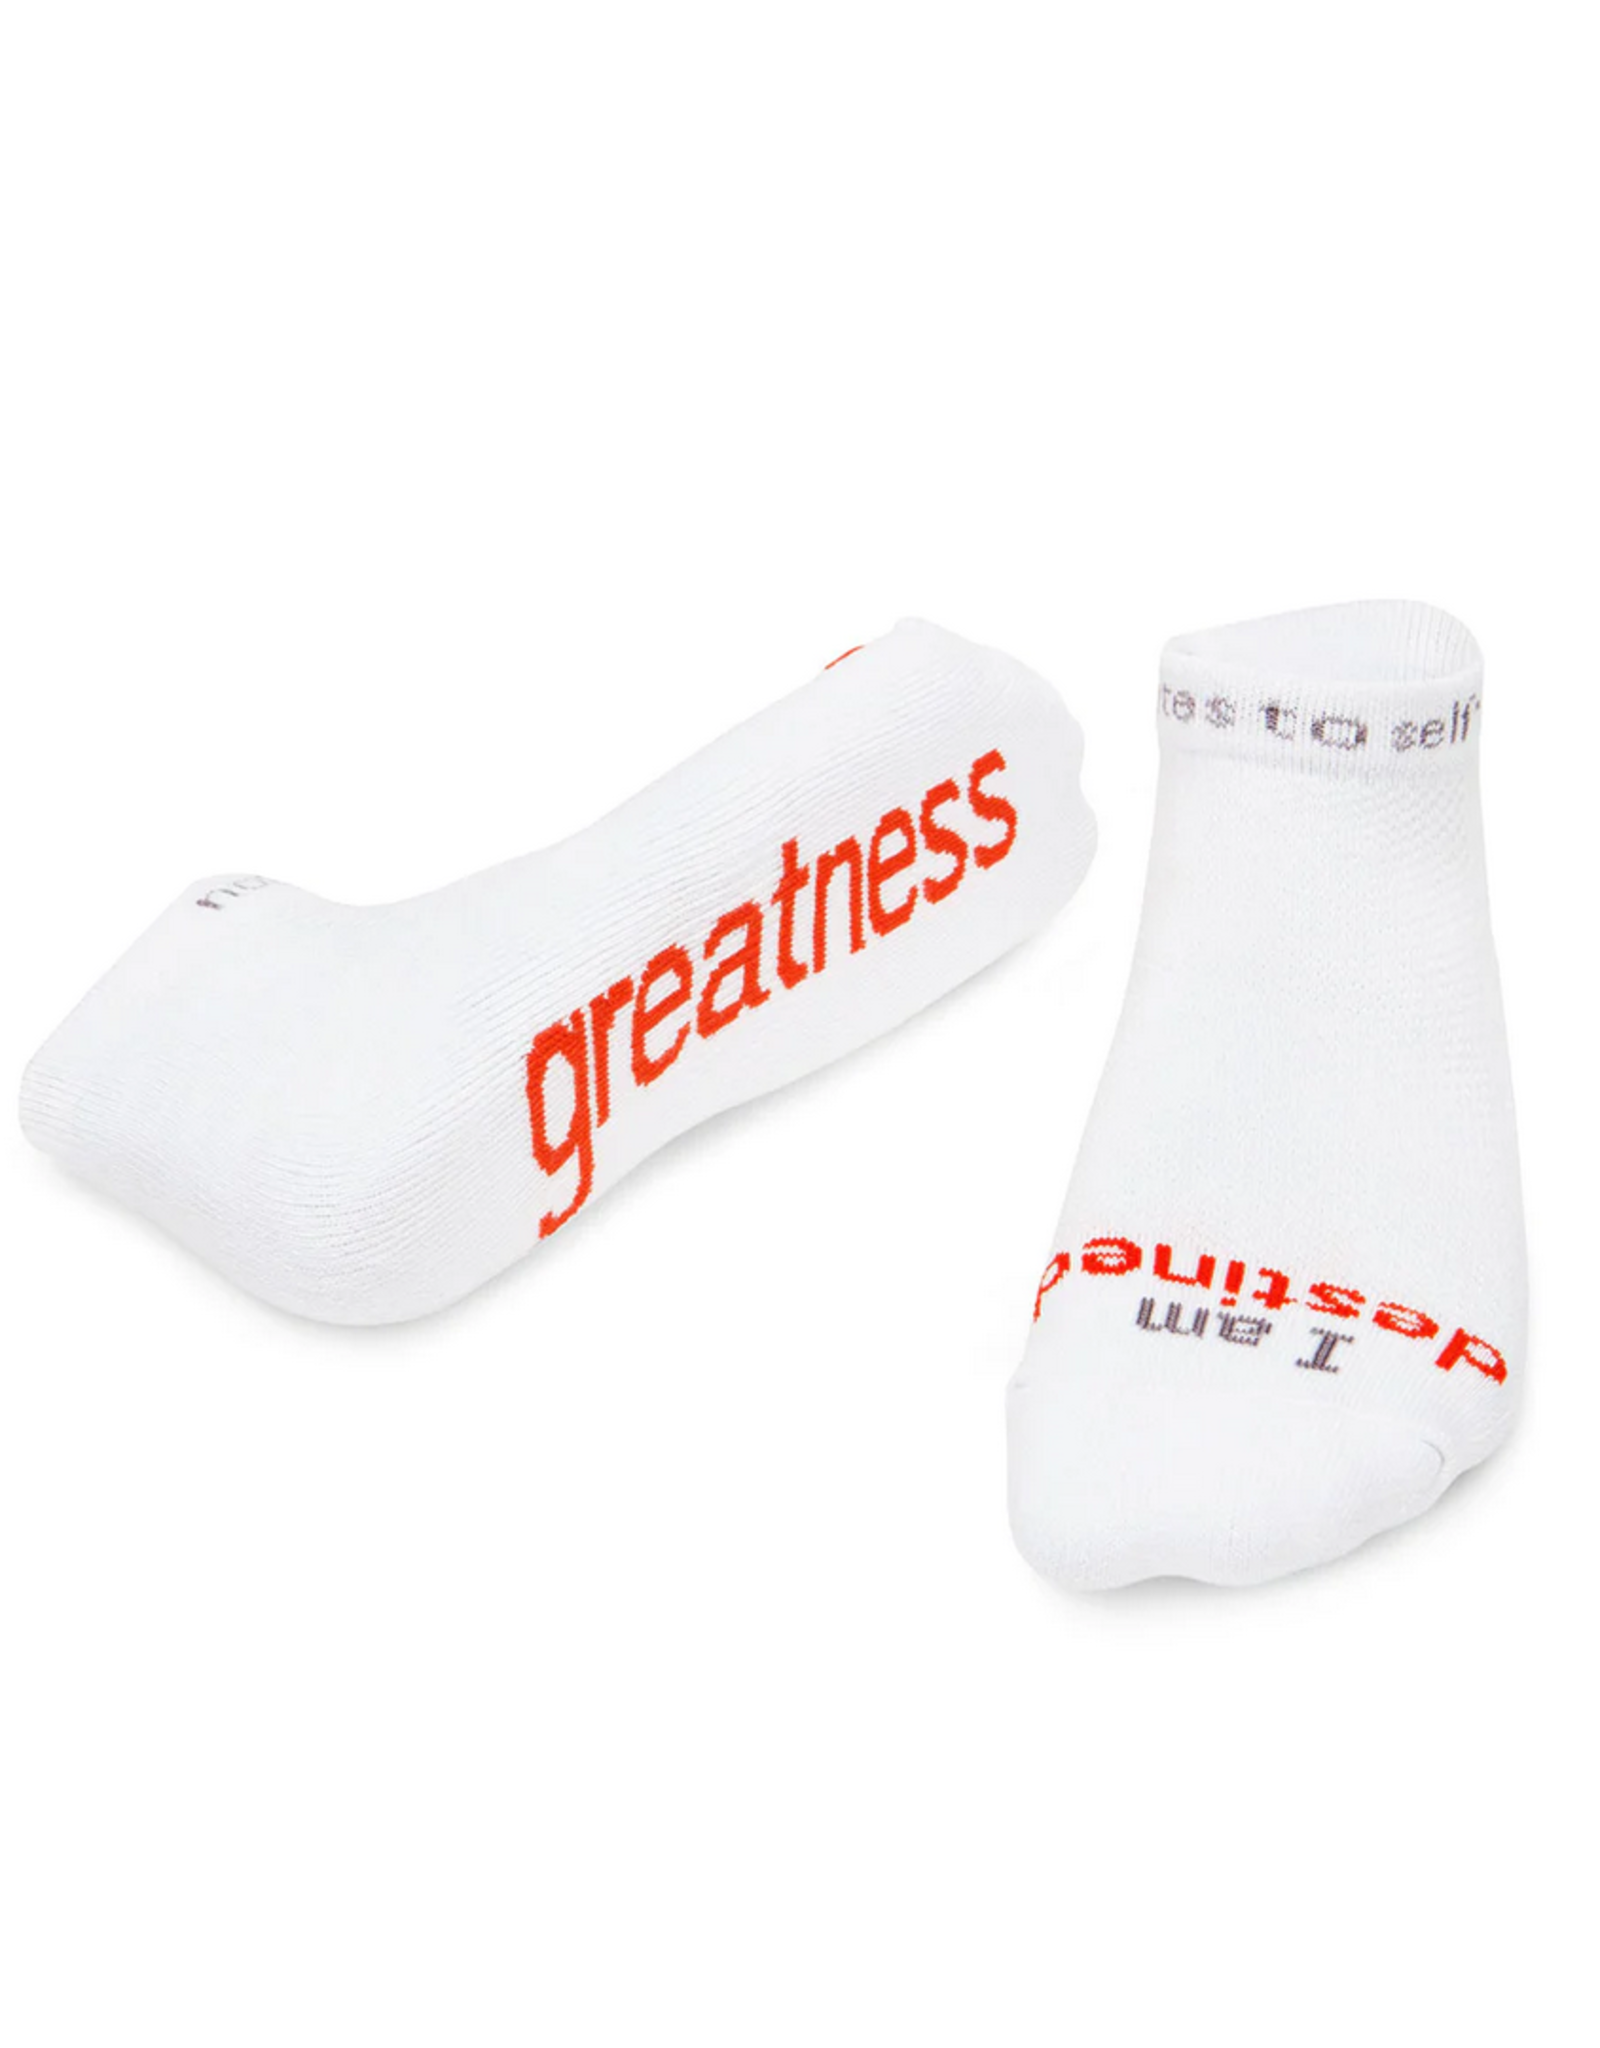 notes to self Notes to Self Destined 'for Greatness” Low-Cut Socks